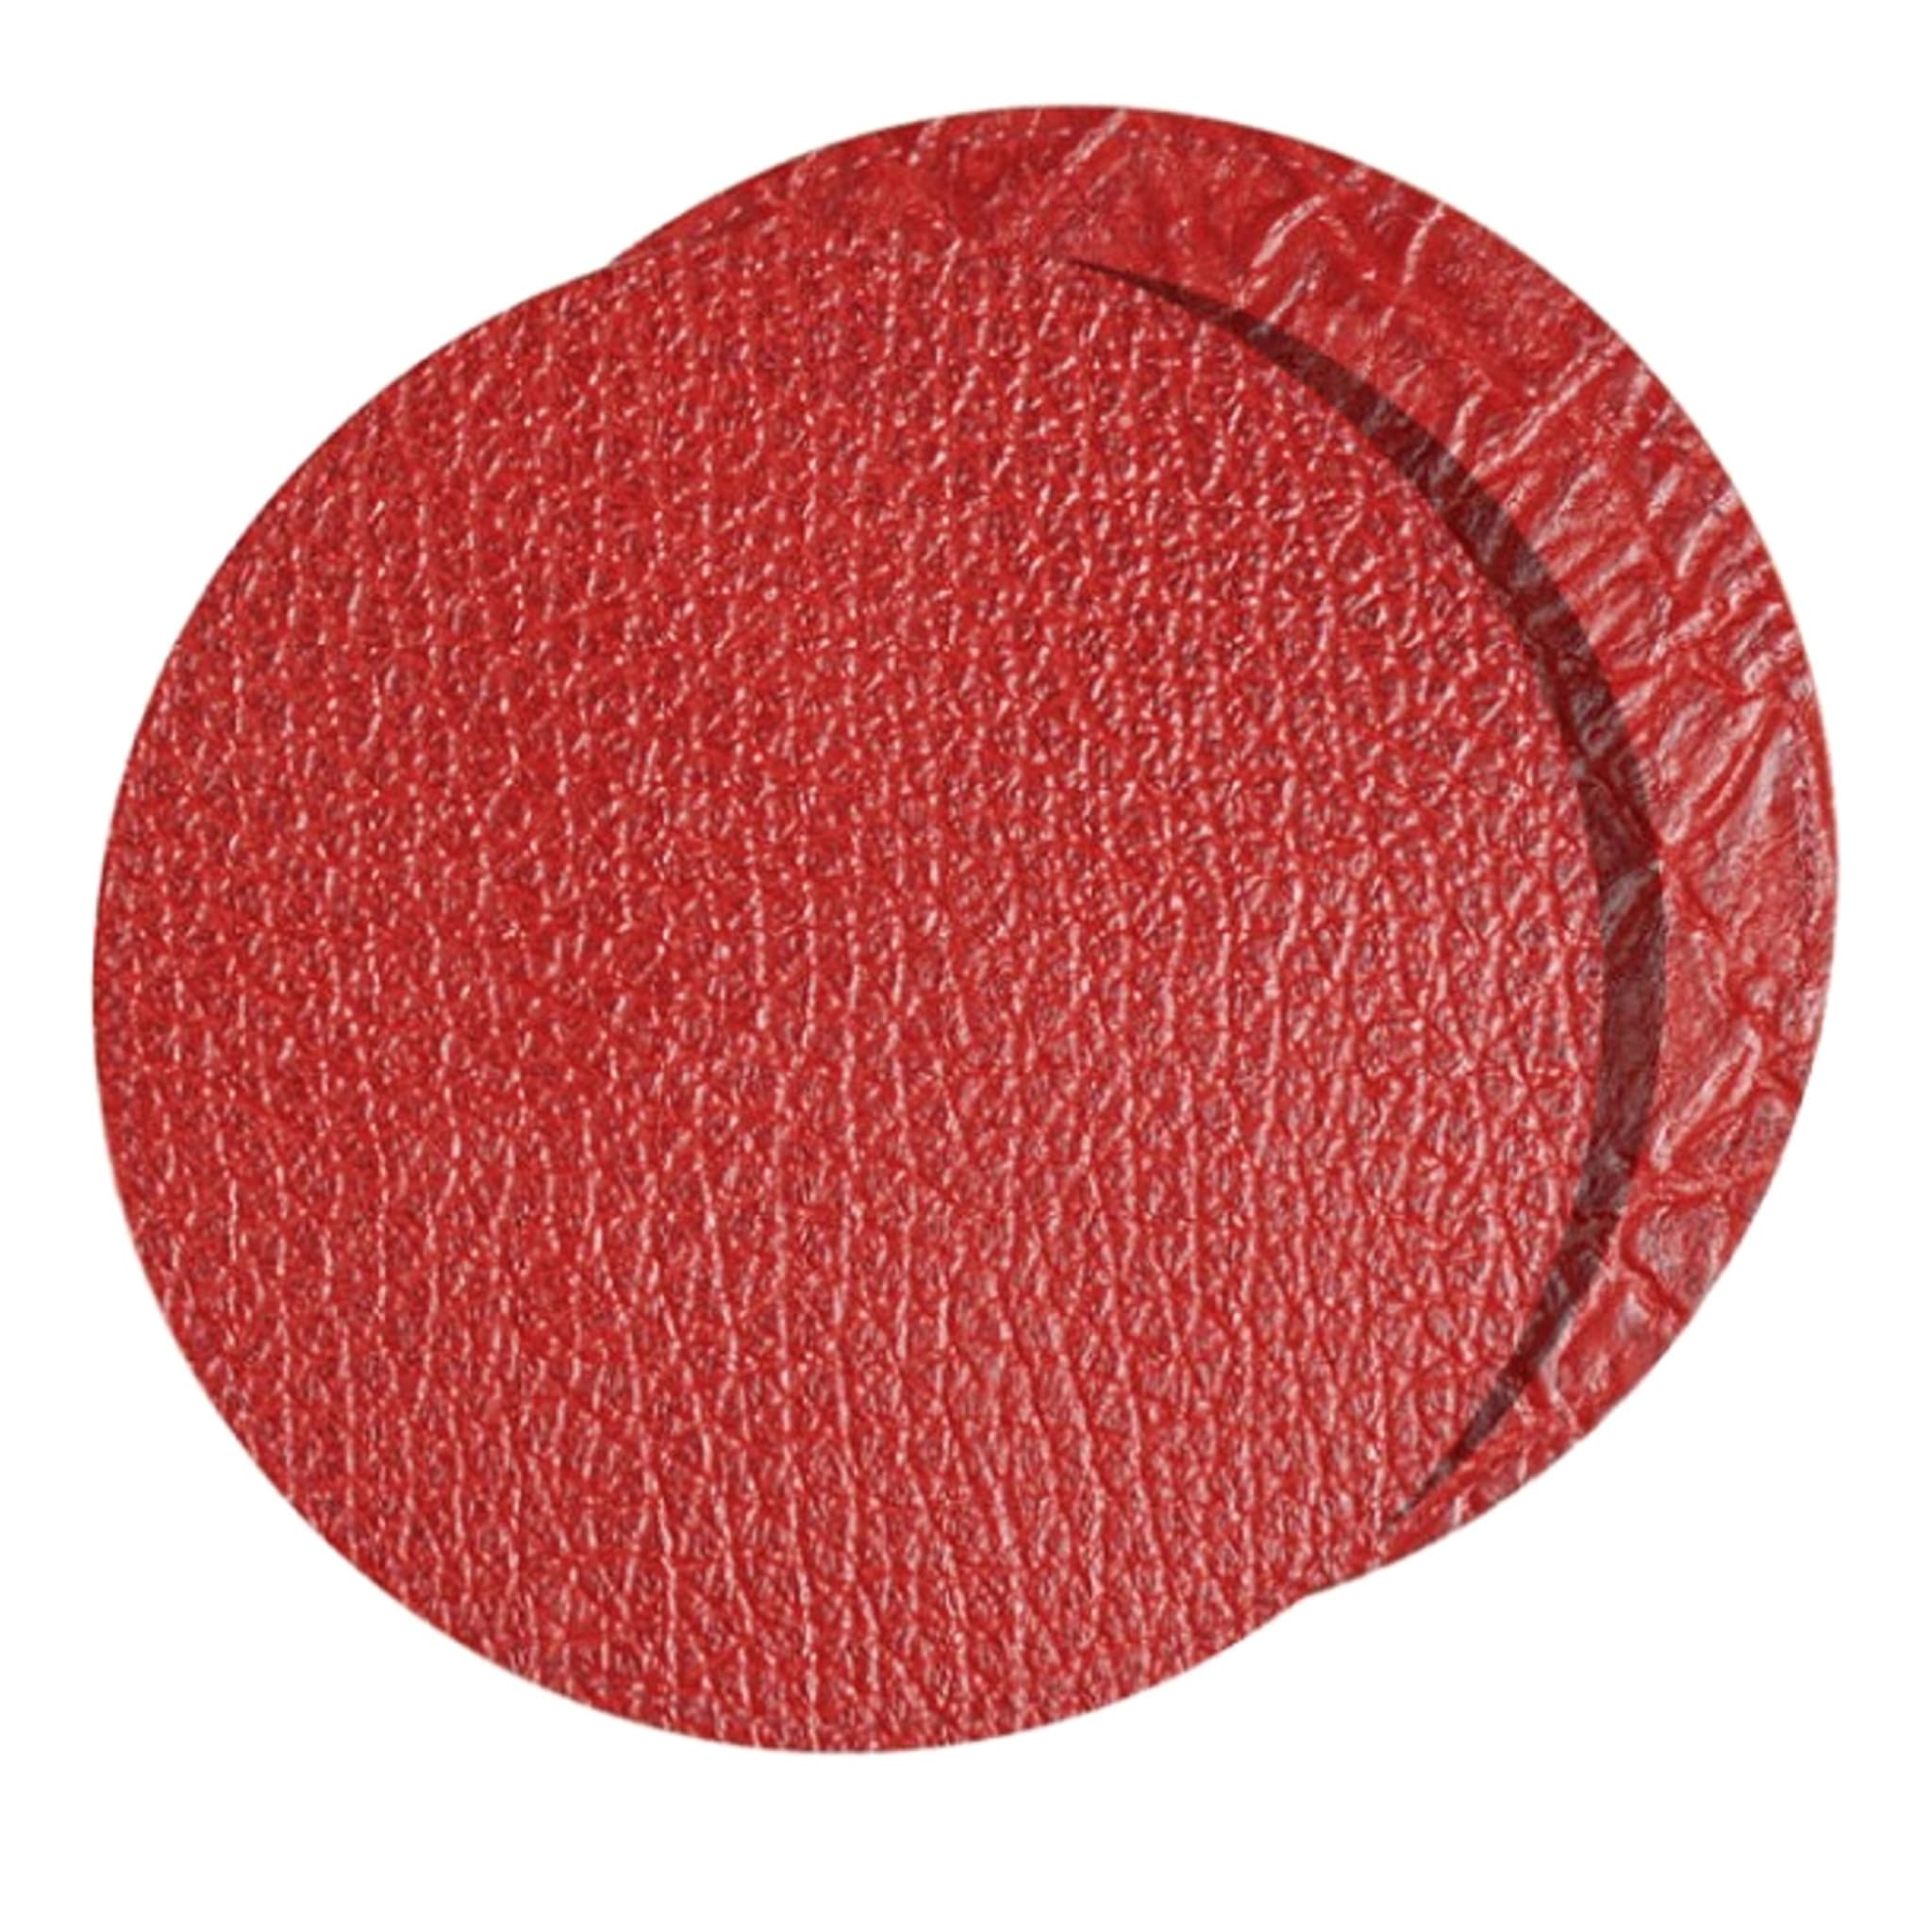 Tanzania Small Set of 2 Round Red Leather Placemats - Main view